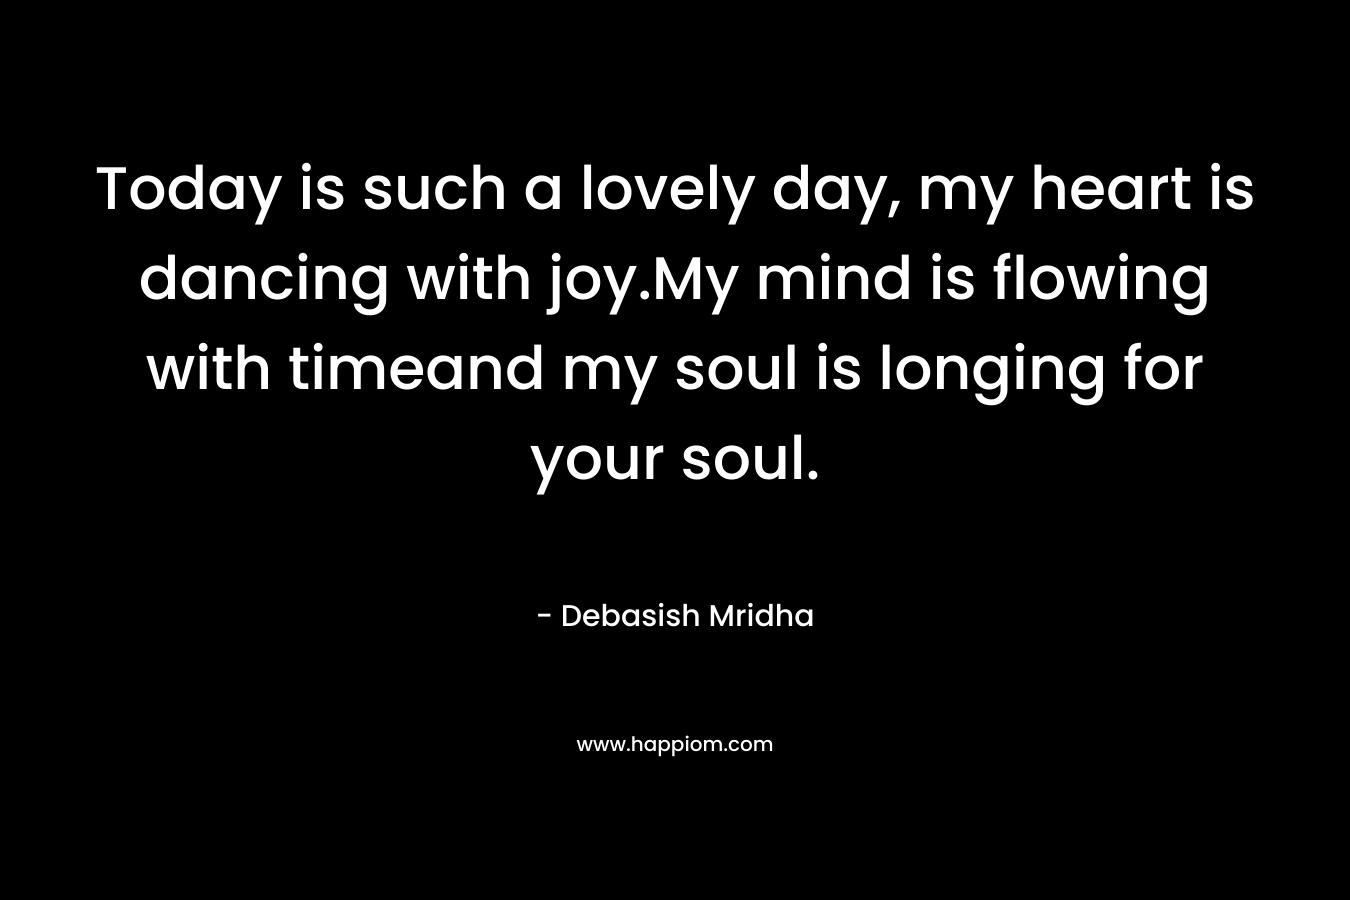 Today is such a lovely day, my heart is dancing with joy.My mind is flowing with timeand my soul is longing for your soul. – Debasish Mridha